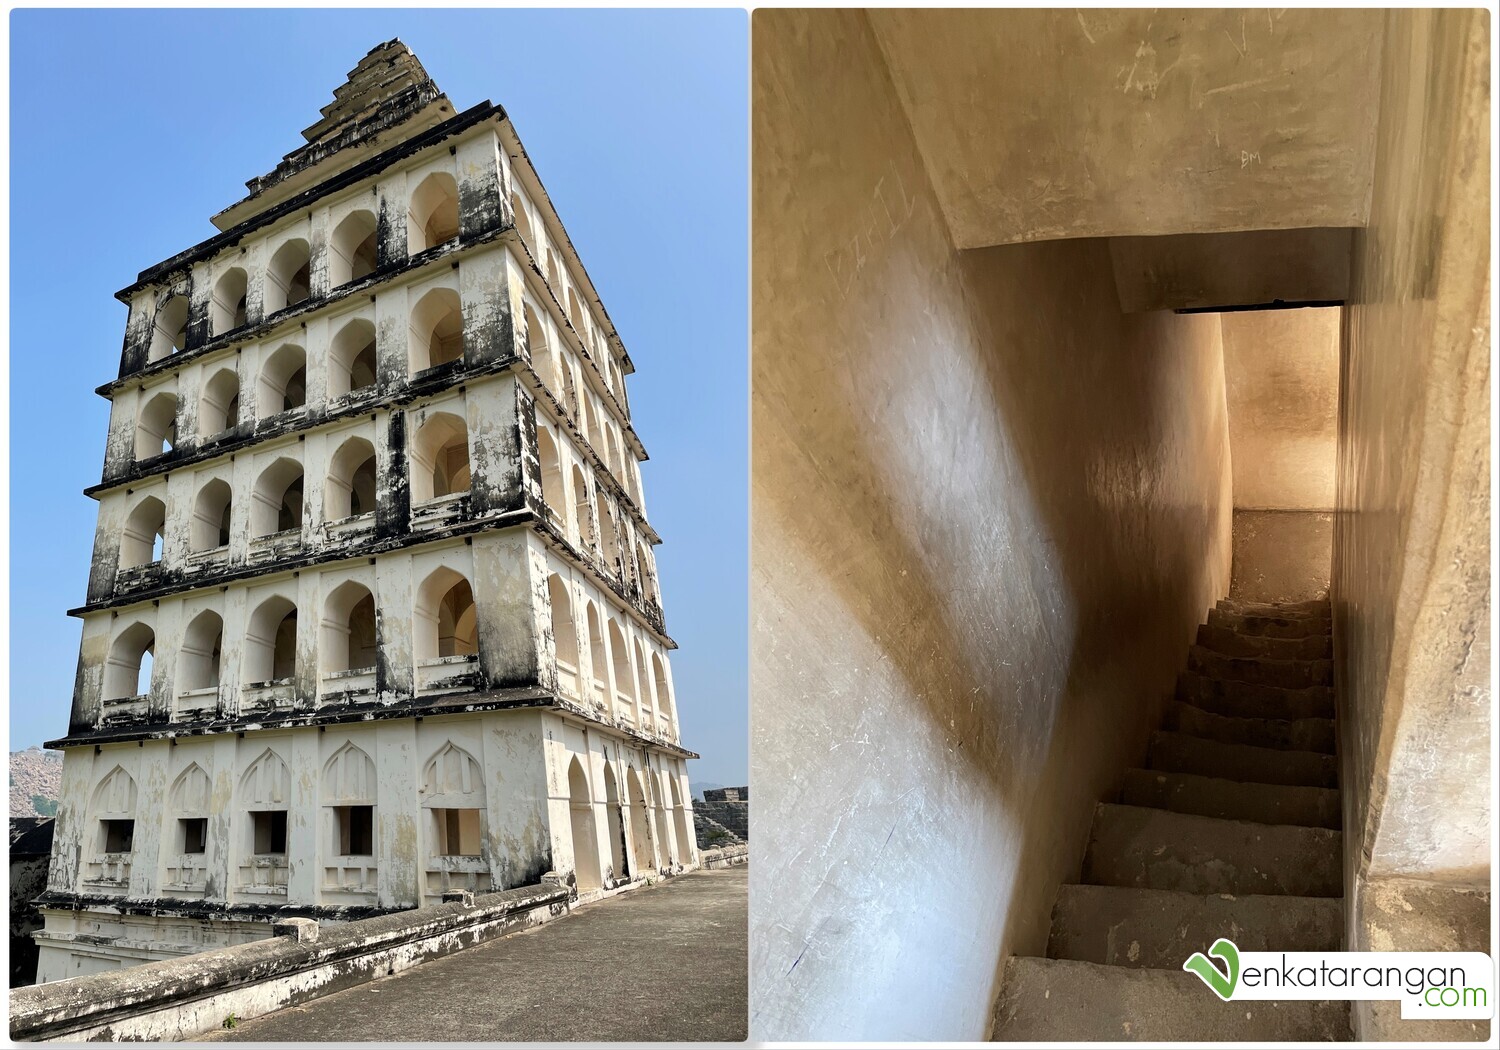 Kalyana Mahala, is the architerctural treasure of the place and the resemblance to the tower in Tanjore palace is obvious due to both being constructed during the Nayaka period. The picture on the right is one of the many staircases to go between the floors. 